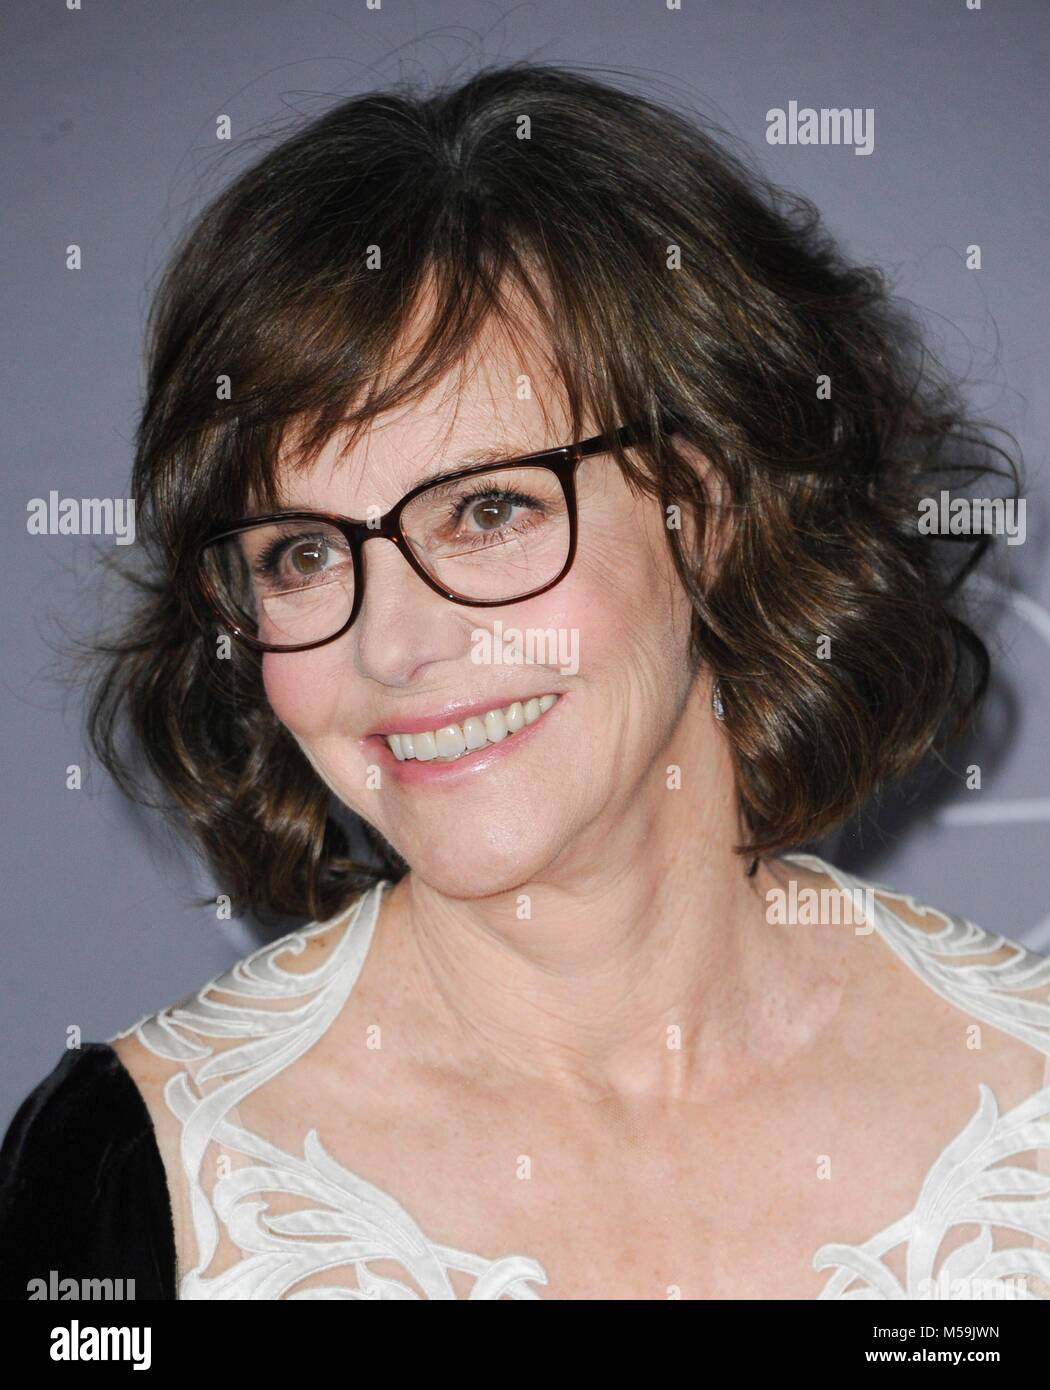 Beverly Hills, California, USA. 20th Feb, 2018. Sally Field at arrivals for 20th Costume Designers Guild Awards (CDGA), The Beverly Hilton Hotel, Beverly Hills, California, USA February 20, 2018. Credit: Elizabeth Goodenough/Everett Collection/Alamy Live News Stock Photo